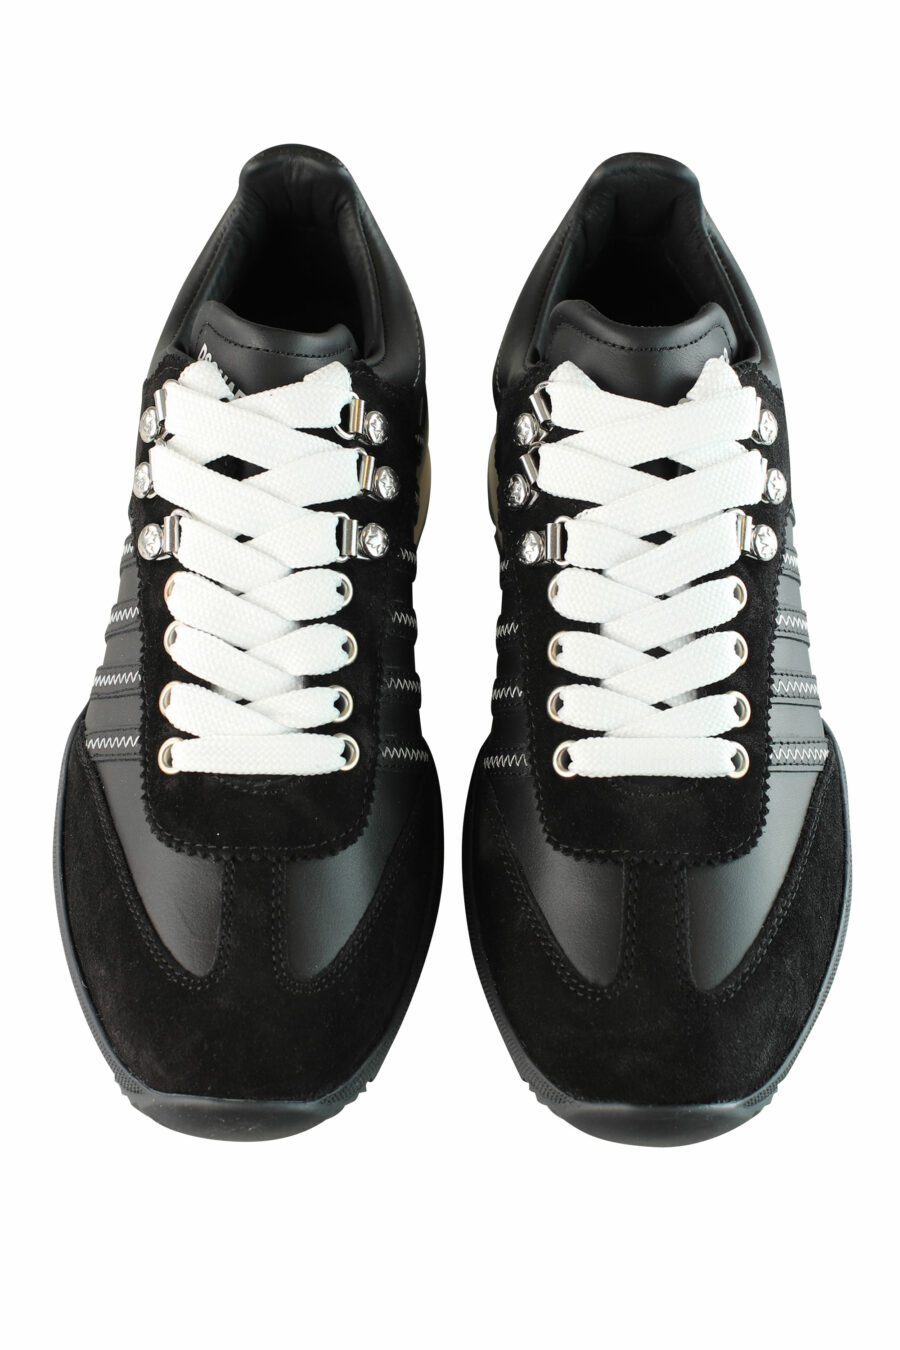 Original legend" black mix trainers with two-tone sole and diagonal lines - IMG 1458